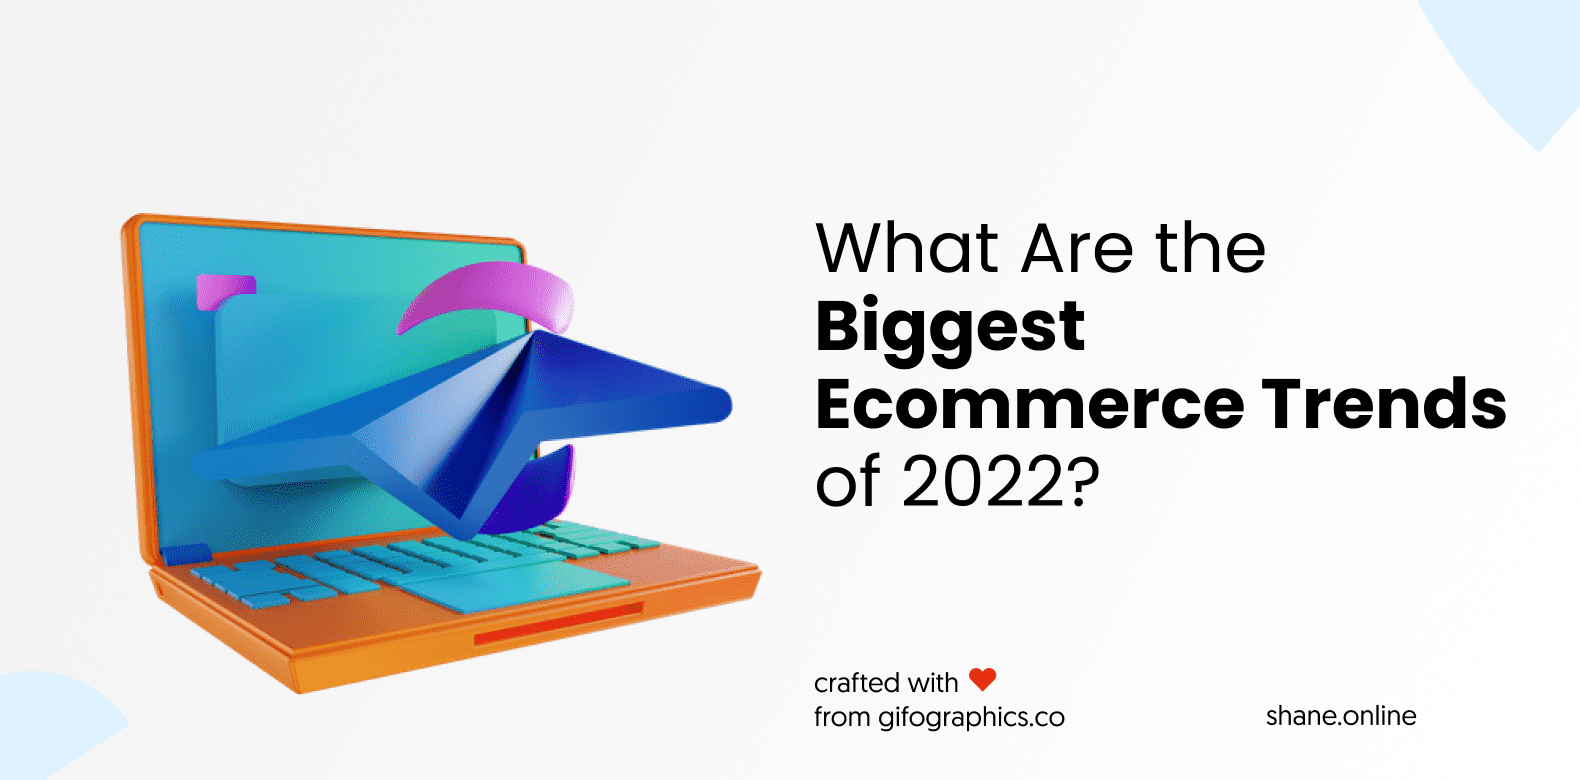 What Are the Biggest Ecommerce Trends of 2022?